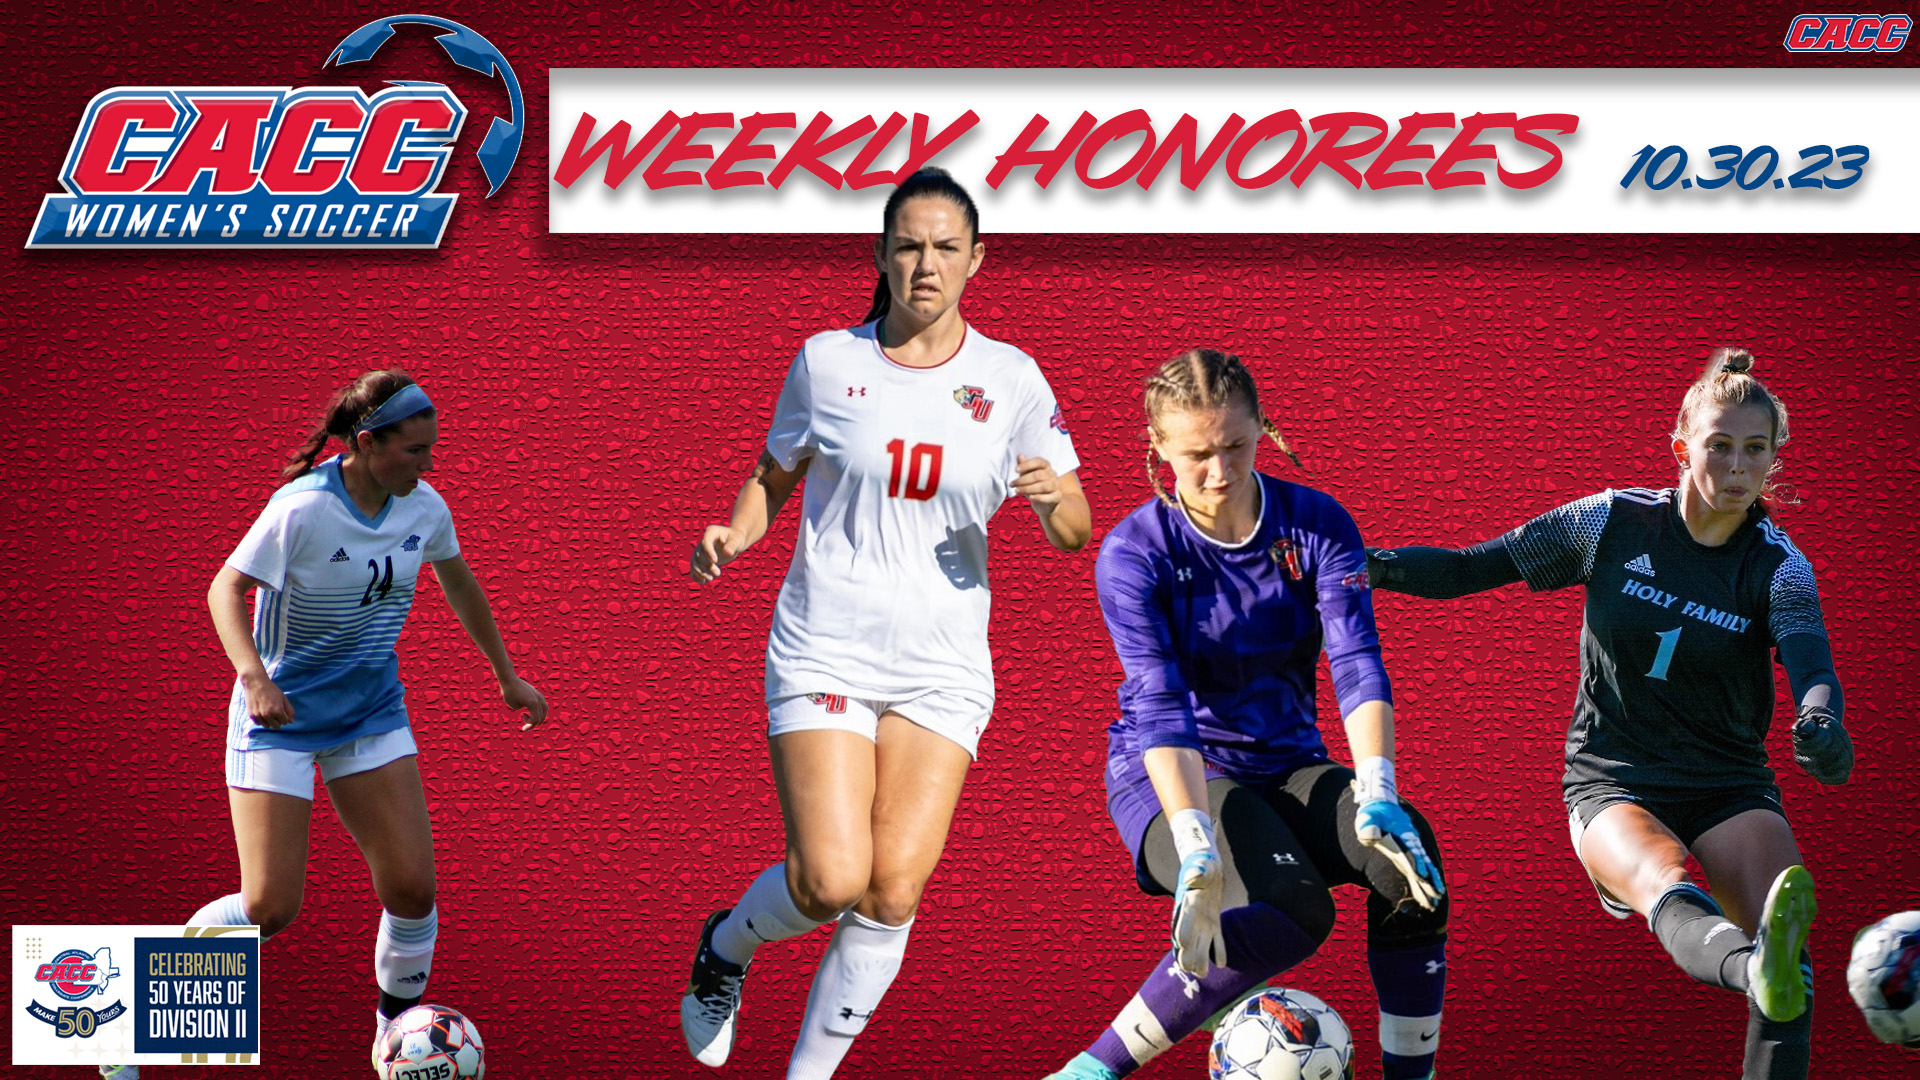 CACC Women's Soccer Weekly Honorees (10-30-23)